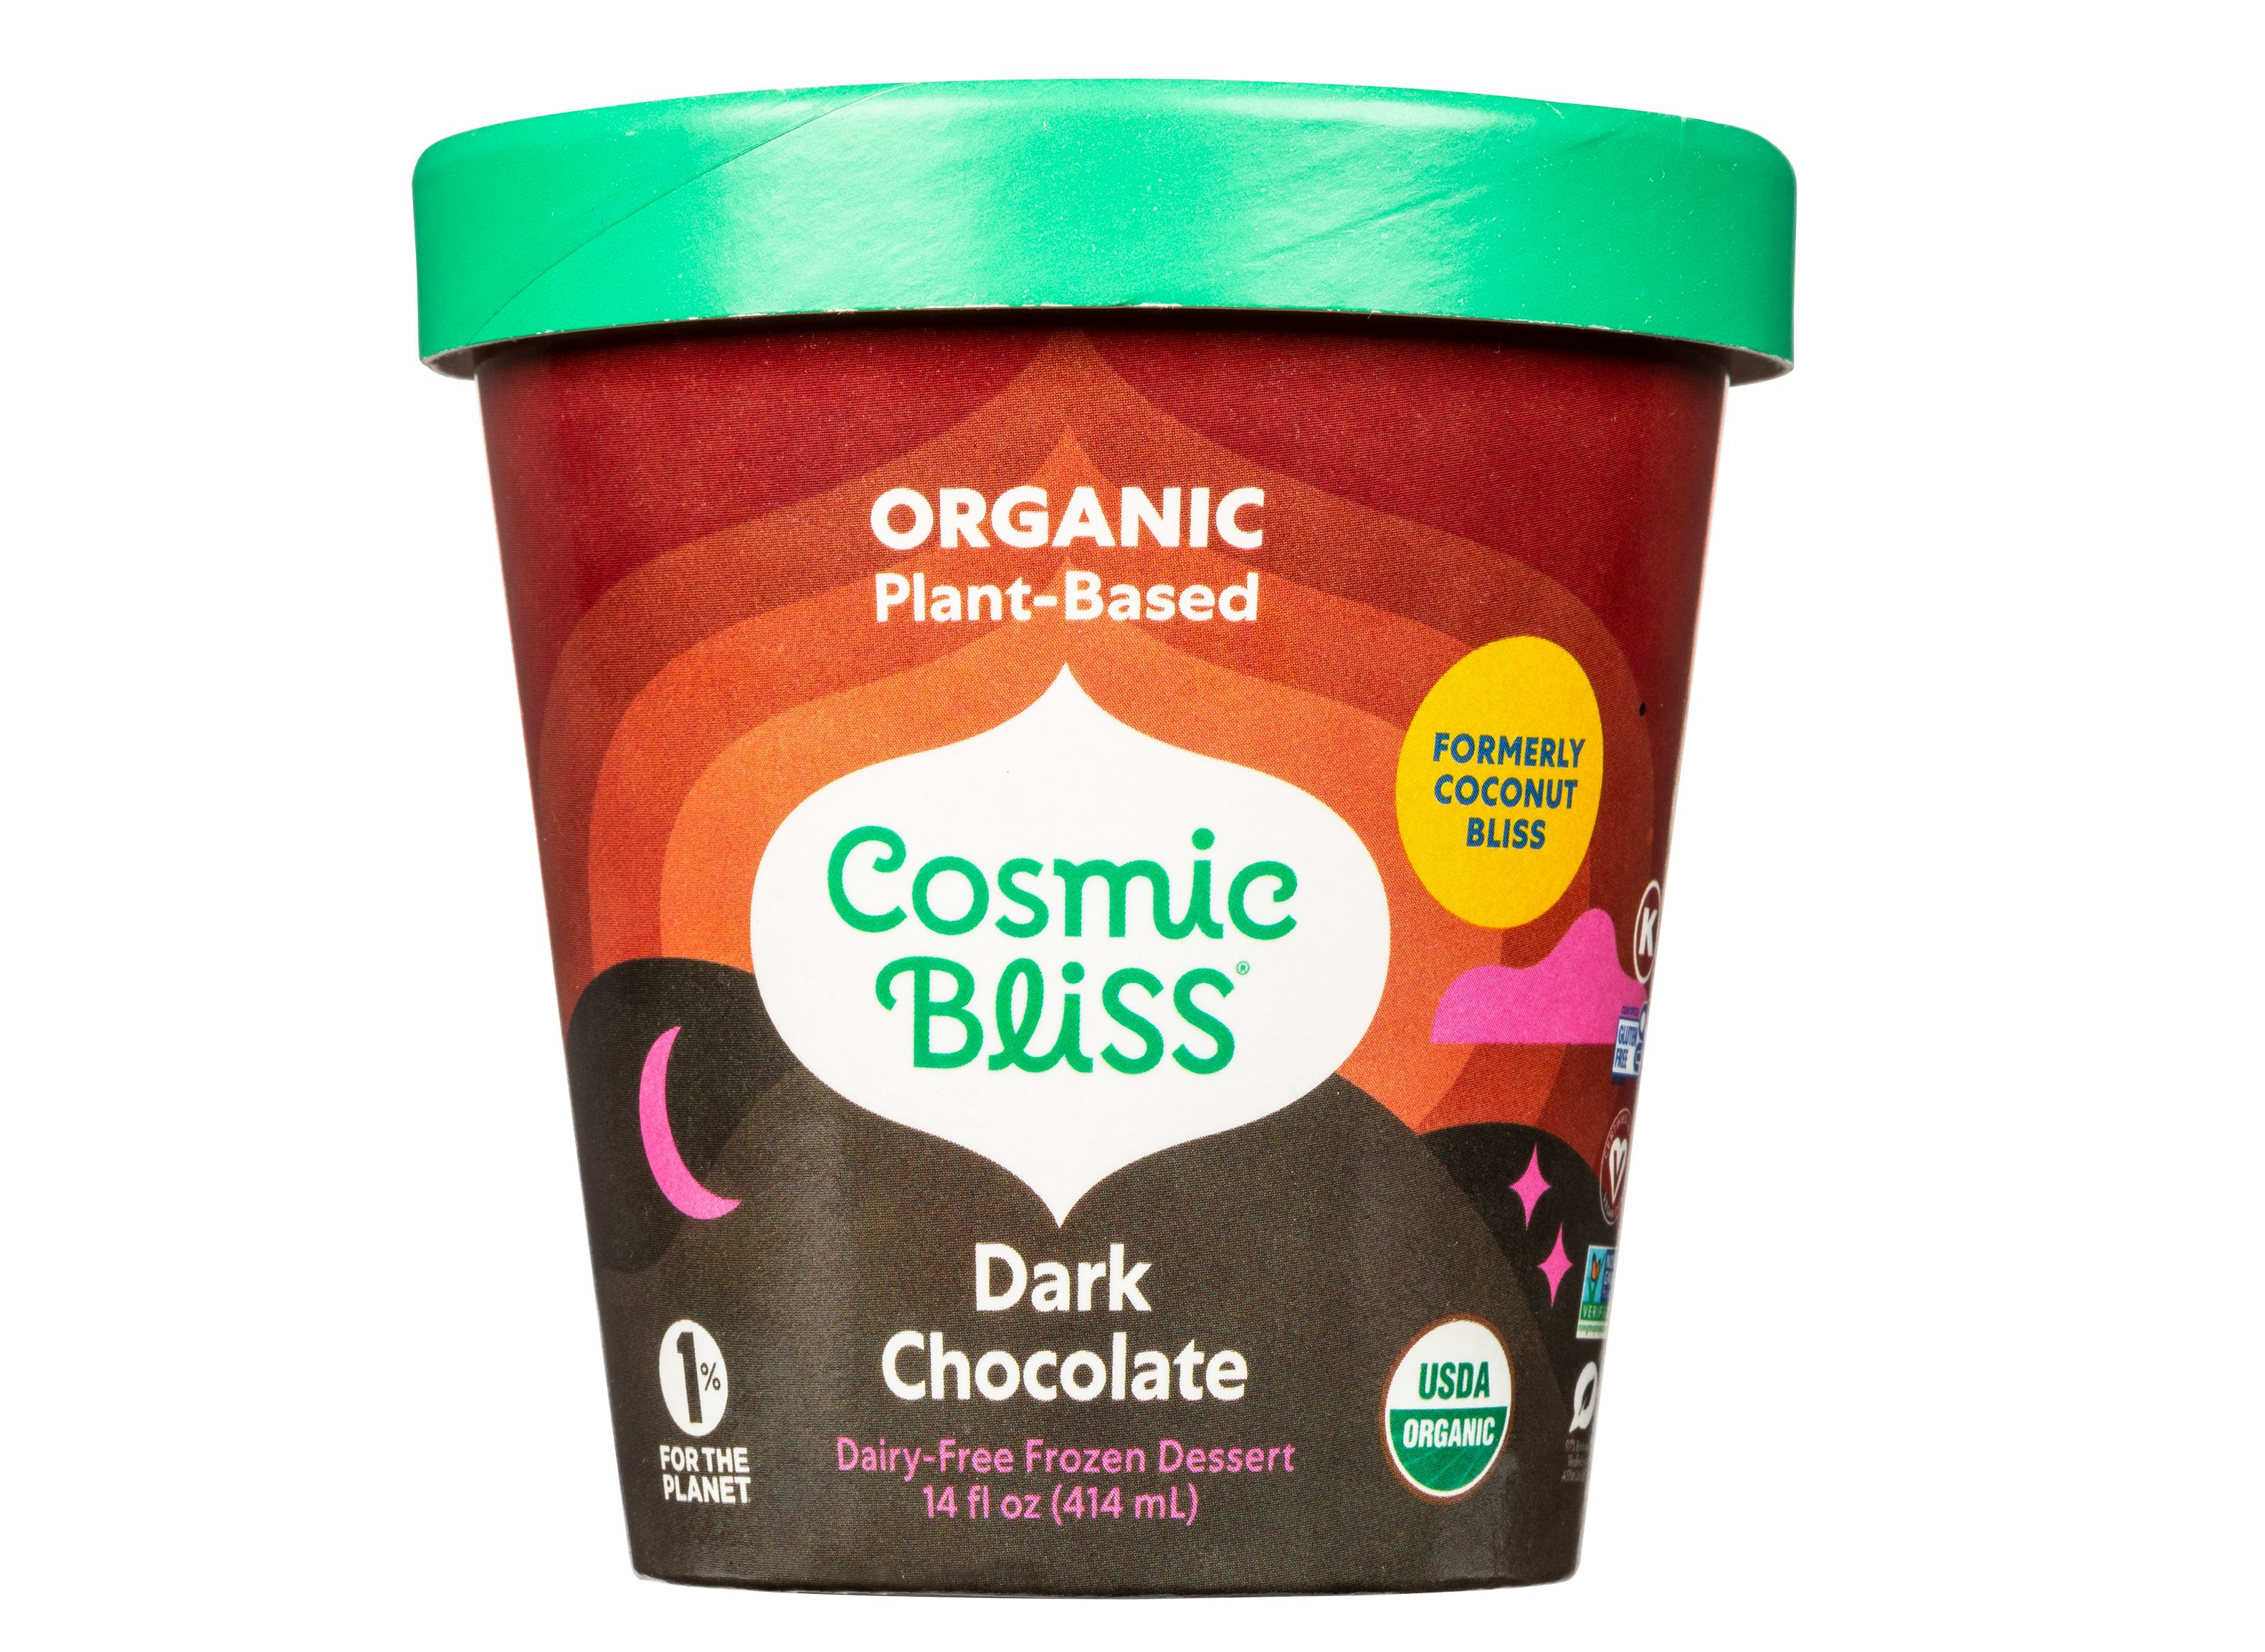 https://crdms.images.consumerreports.org/prod/products/cr/models/405594-ice-creams-frozen-desserts-cosmic-bliss-organic-dairy-free-frozen-dessert-dark-chocolate-10027967.png